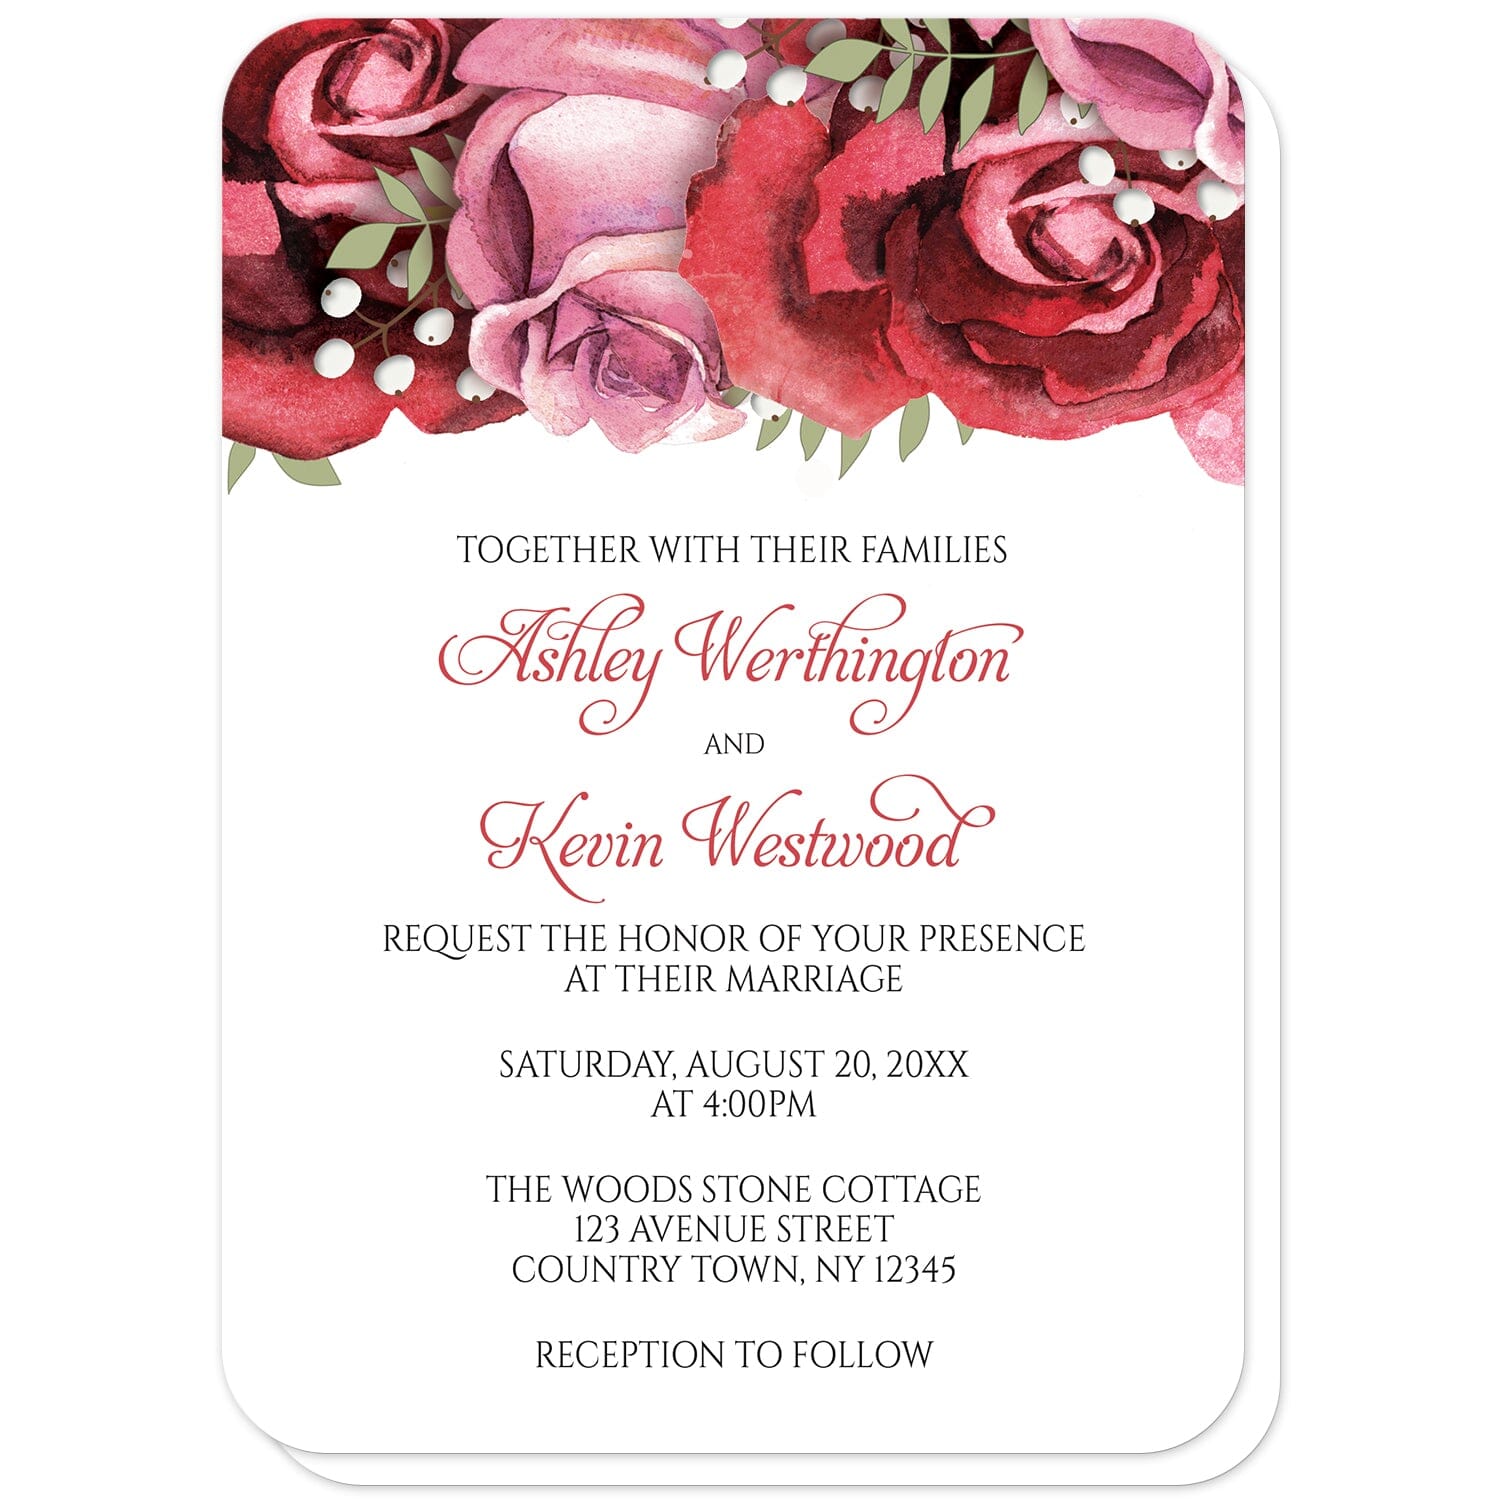 Burgundy Red Pink Rose Wedding Invitations (with rounded corners) at Artistically Invited. Beautiful burgundy red pink rose wedding invitations with gorgeous burgundy red and pink roses along the top. Your personalized marriage celebration details are custom printed in in burgundy and black on white below the pretty roses. 